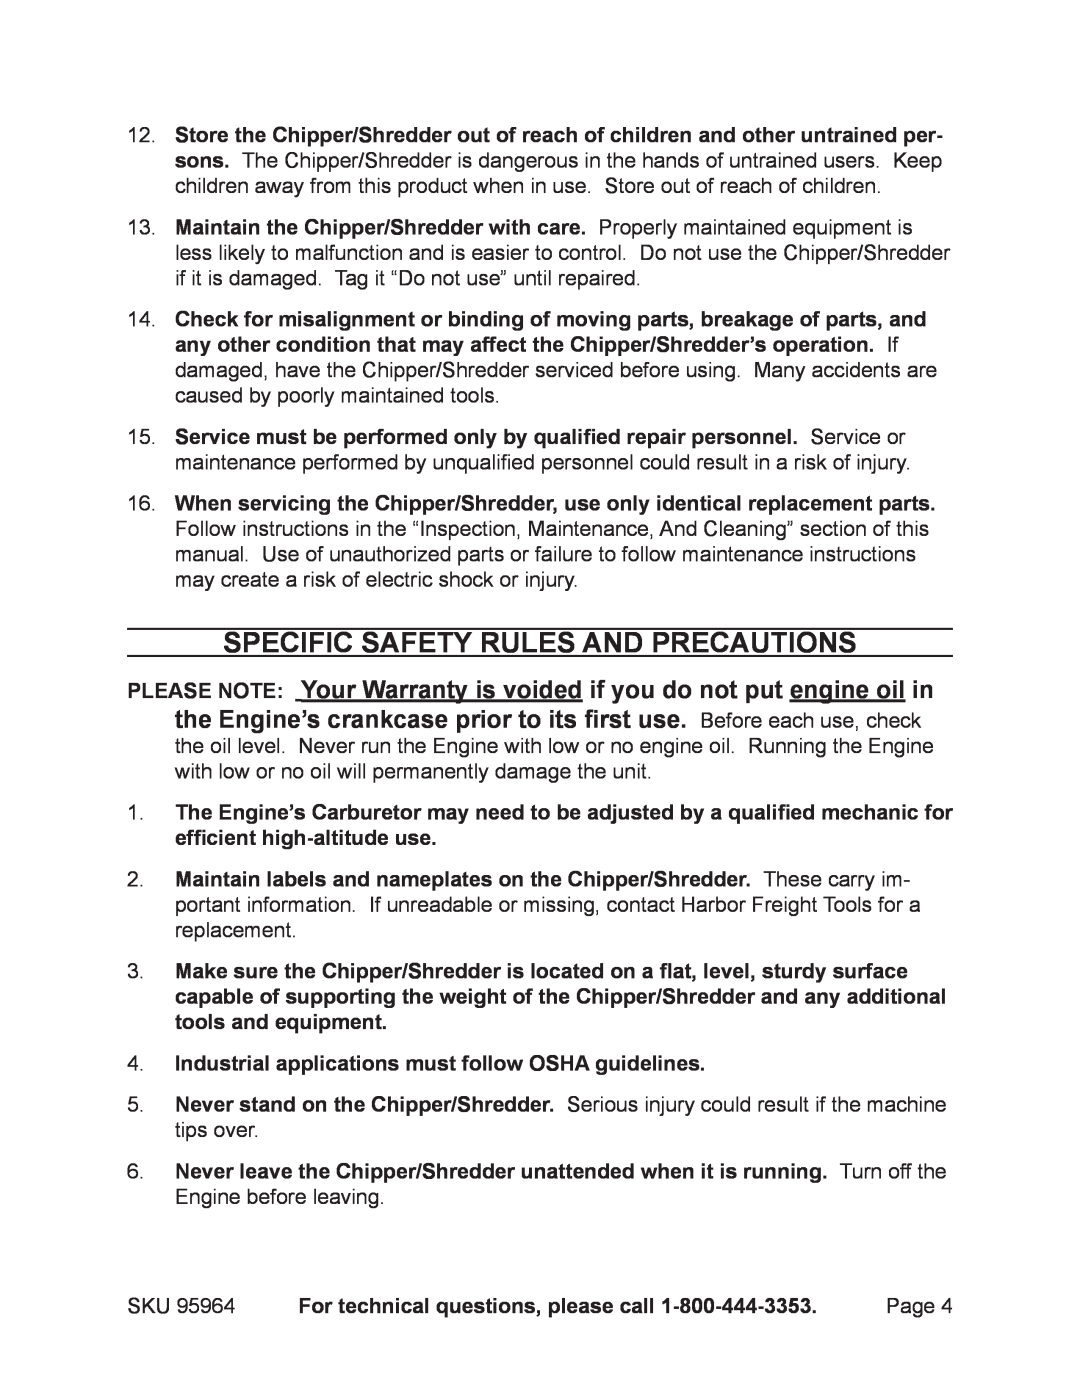 Harbor Freight Tools 95964 Specific Safety Rules And Precautions, Industrial applications must follow OSHA guidelines 